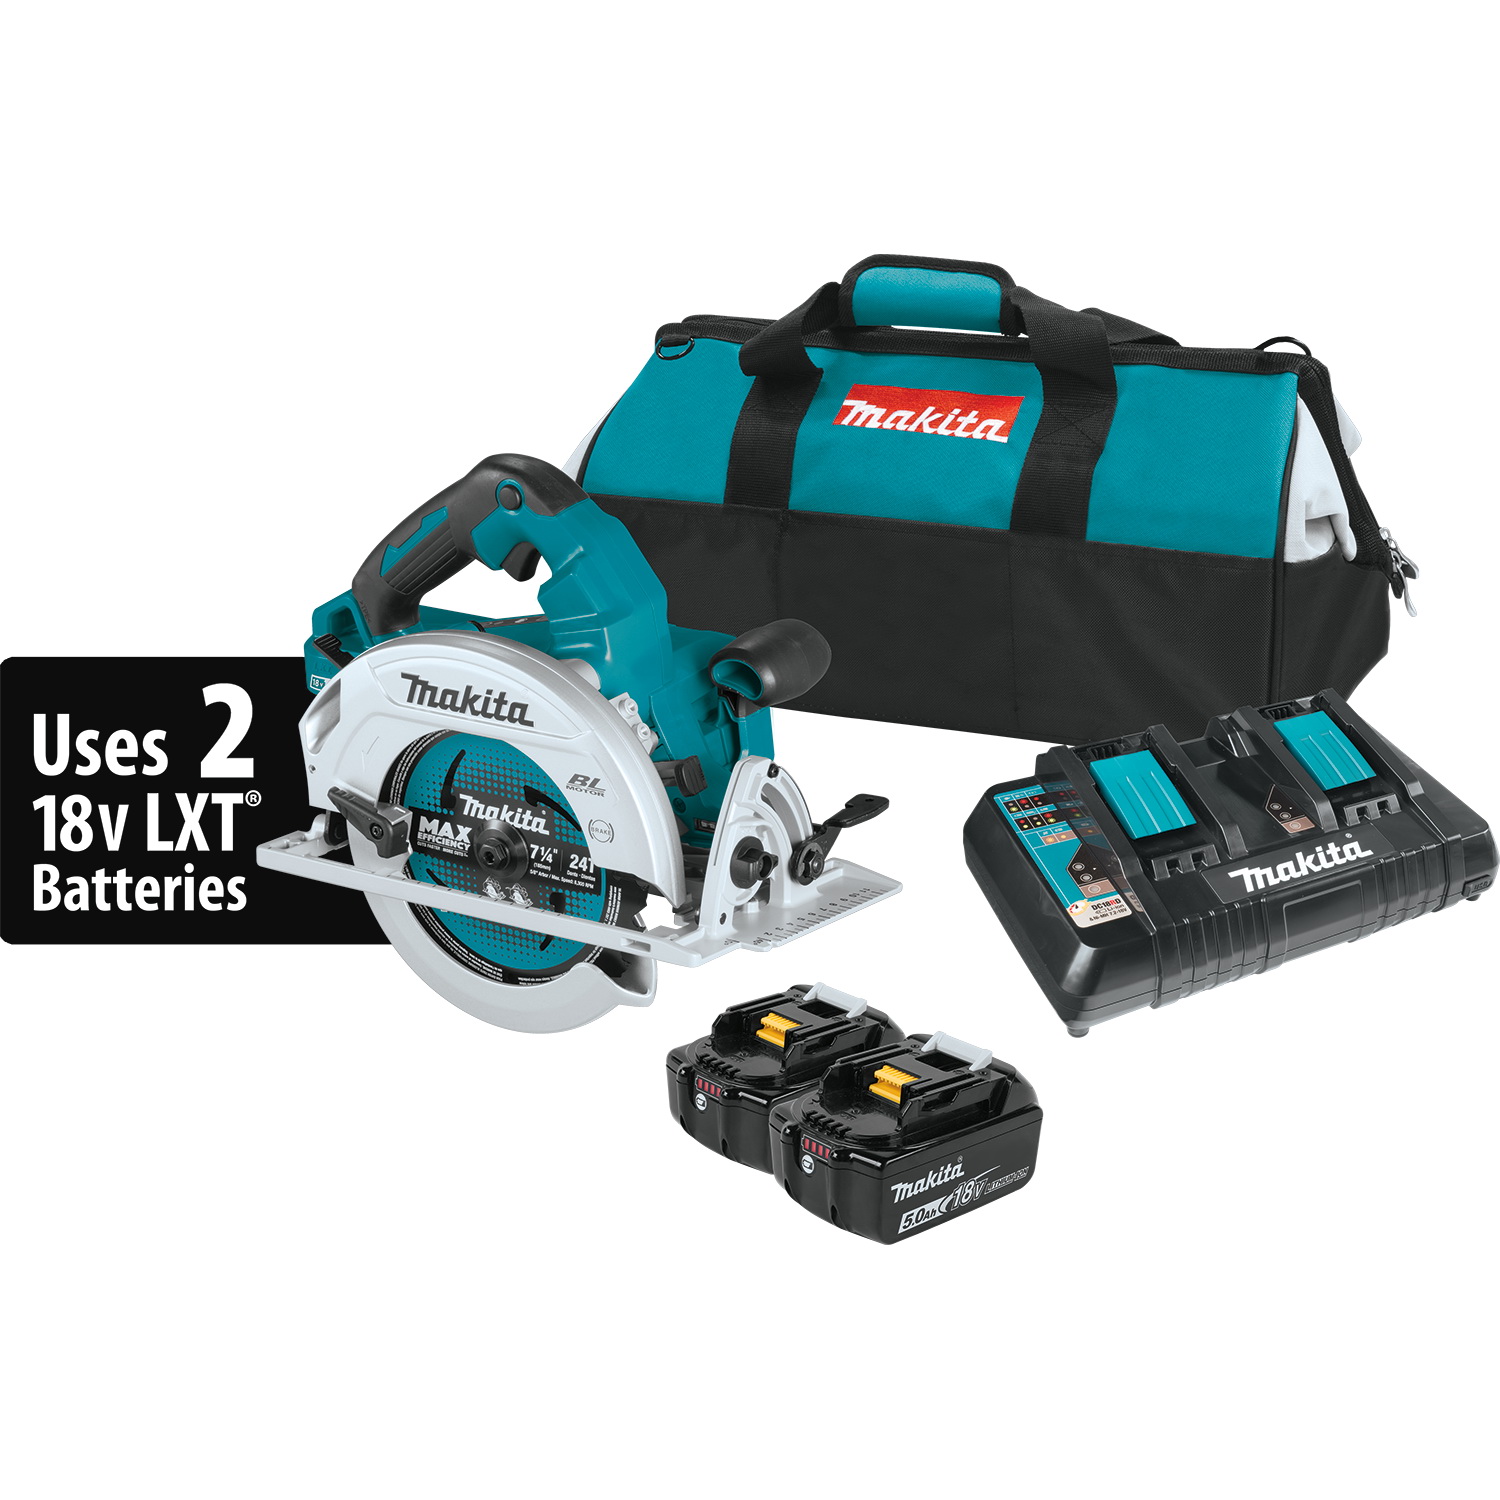 Buy Makita GSR01M1 Brushless Circular Saw Kit, Battery Included, 40 V,  Ah, 7-1/4 in Dia Blade, 2-9/16 in D Cutting